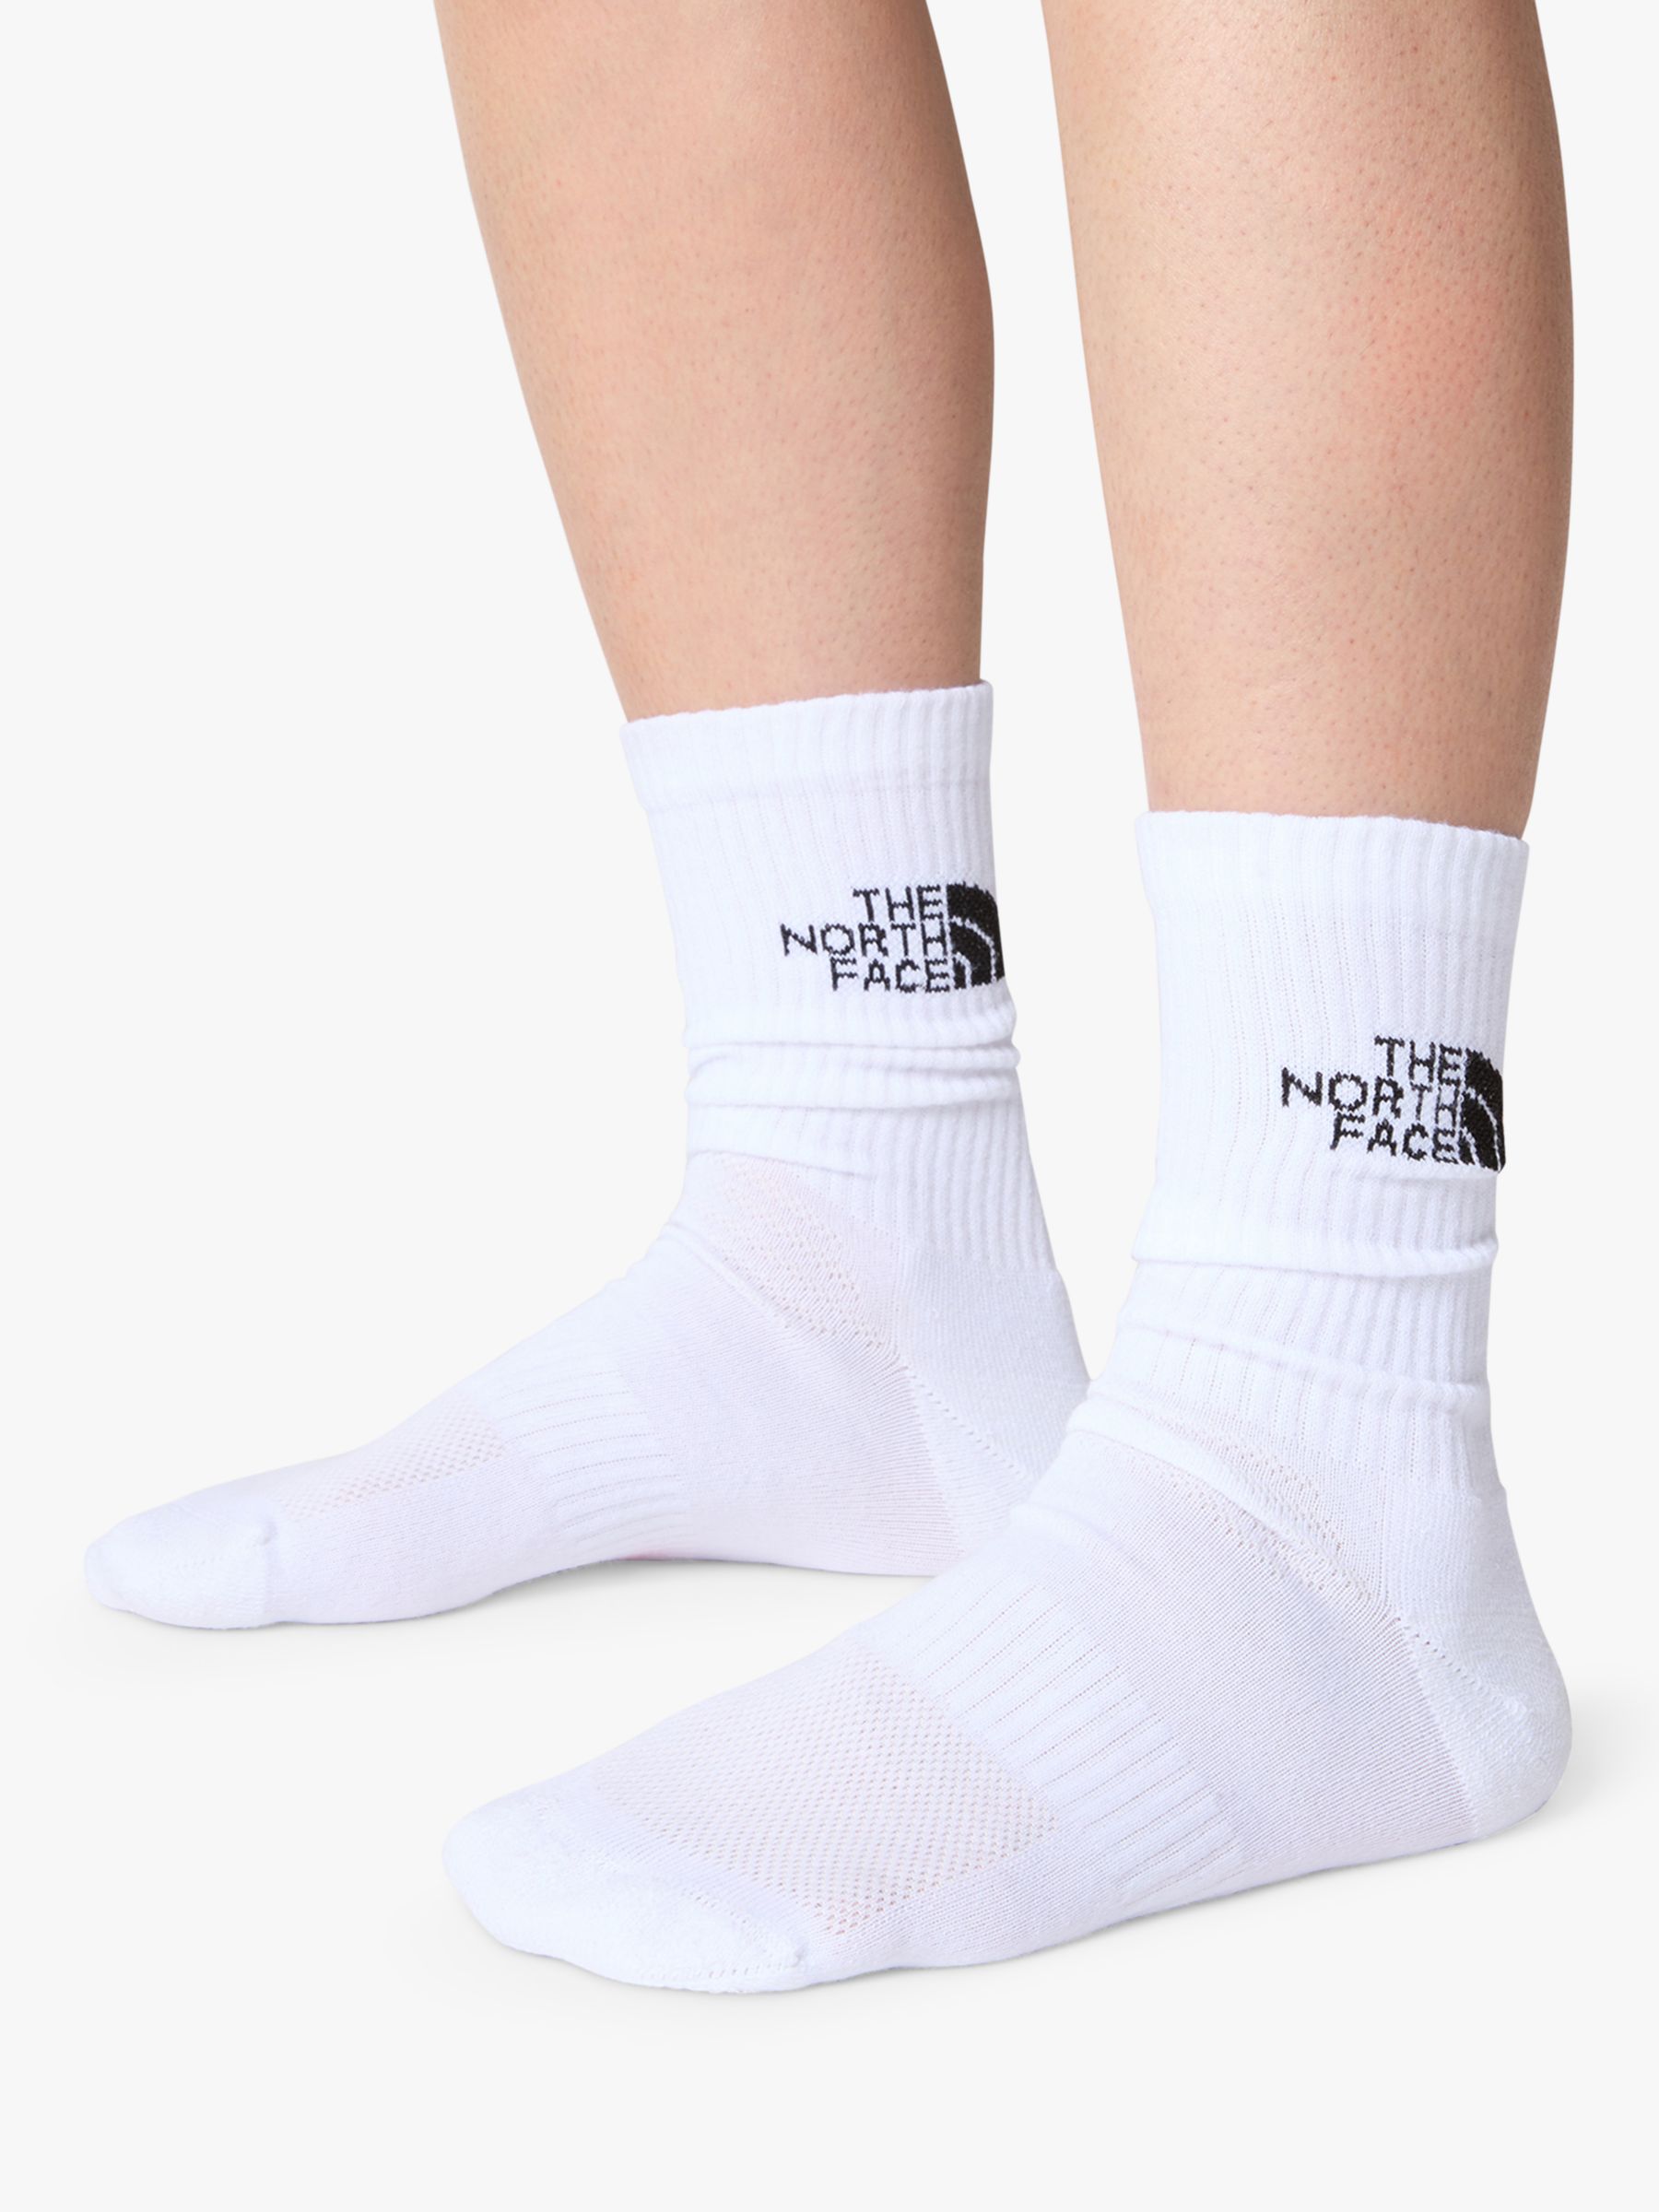 Buy The North Face Multi Sport Cushion Crew Socks Online at johnlewis.com